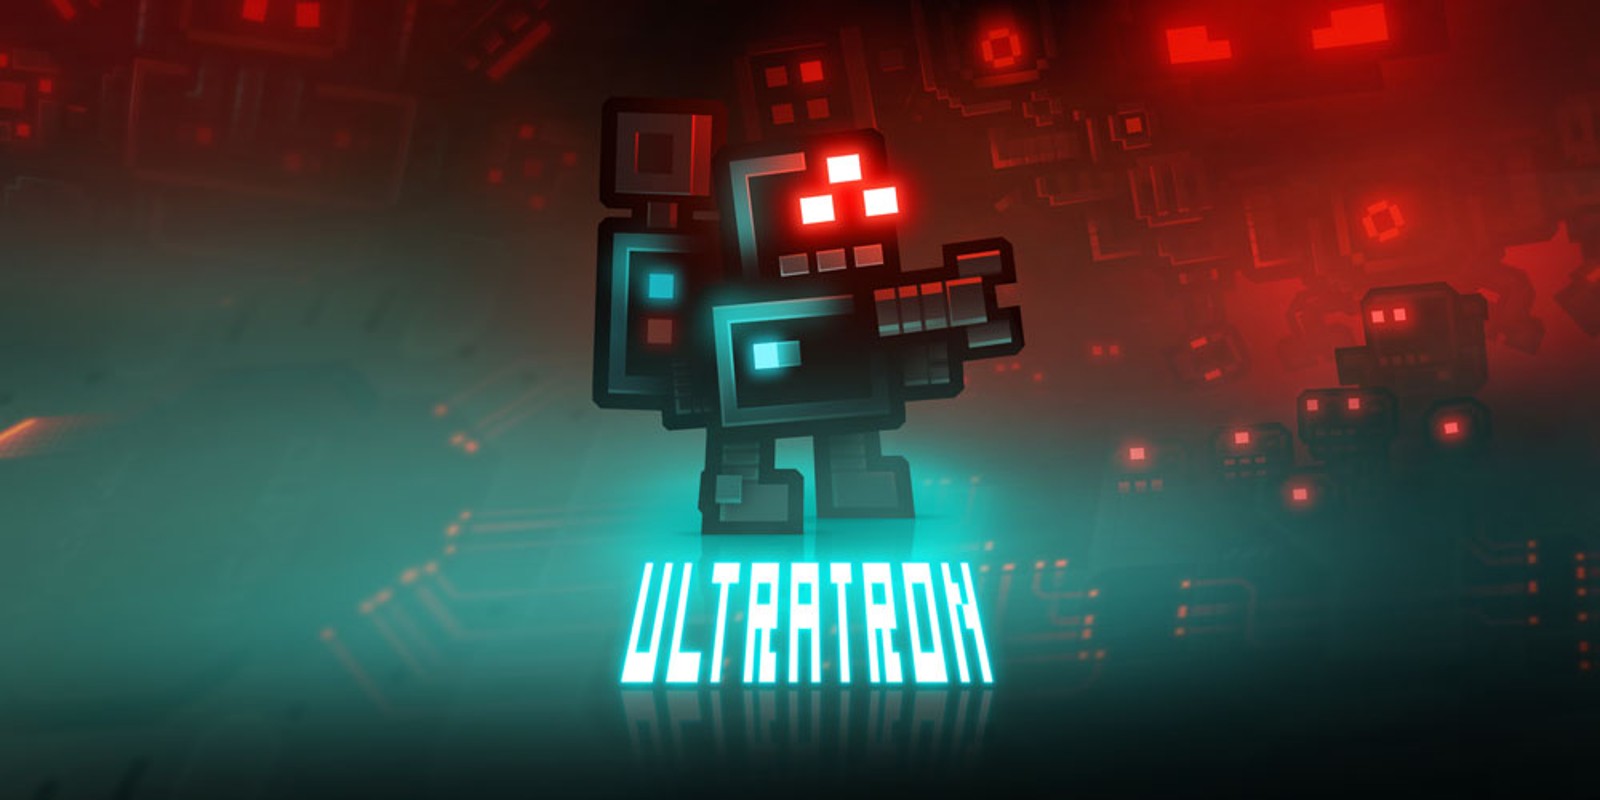 voice actor for ultratron